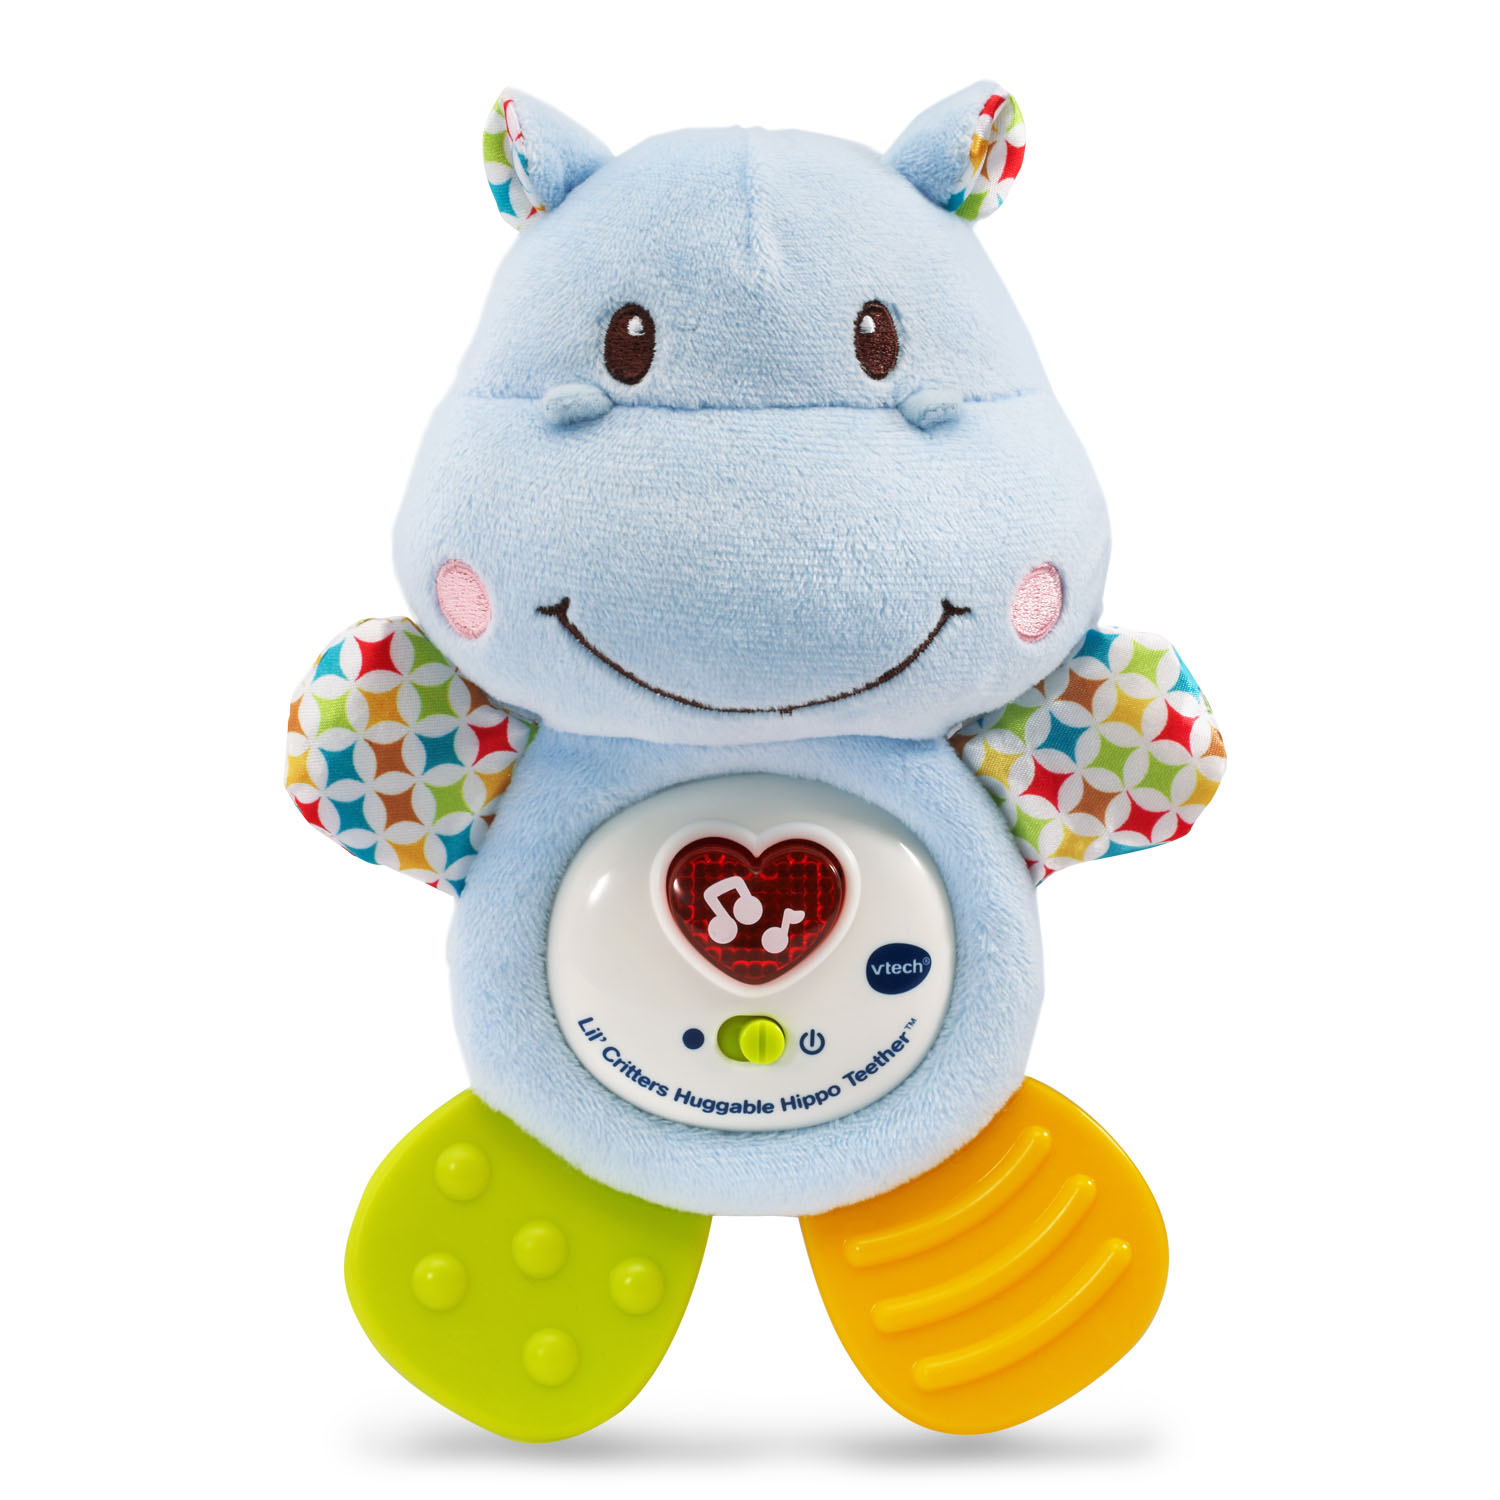 VTech Lil' Critters Huggable Hippo Teether - image 3 of 6